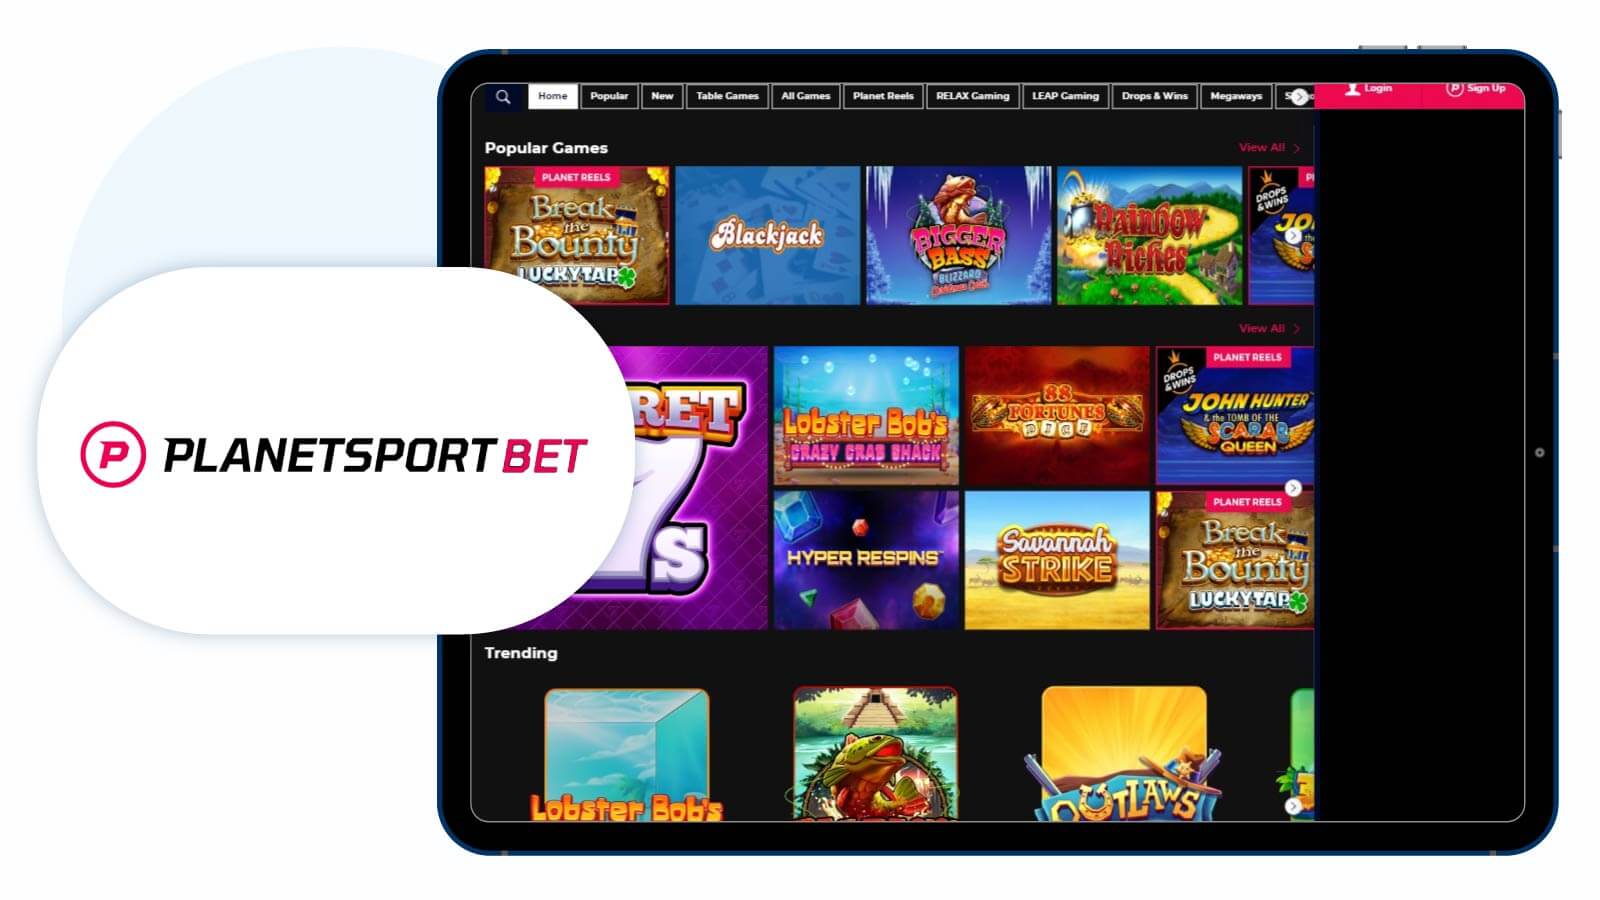 Planet-Sports-Bet-Deposit-with-Visa-and-Try-a-Generous-Live-Dealer-Casino-Games-Catalog